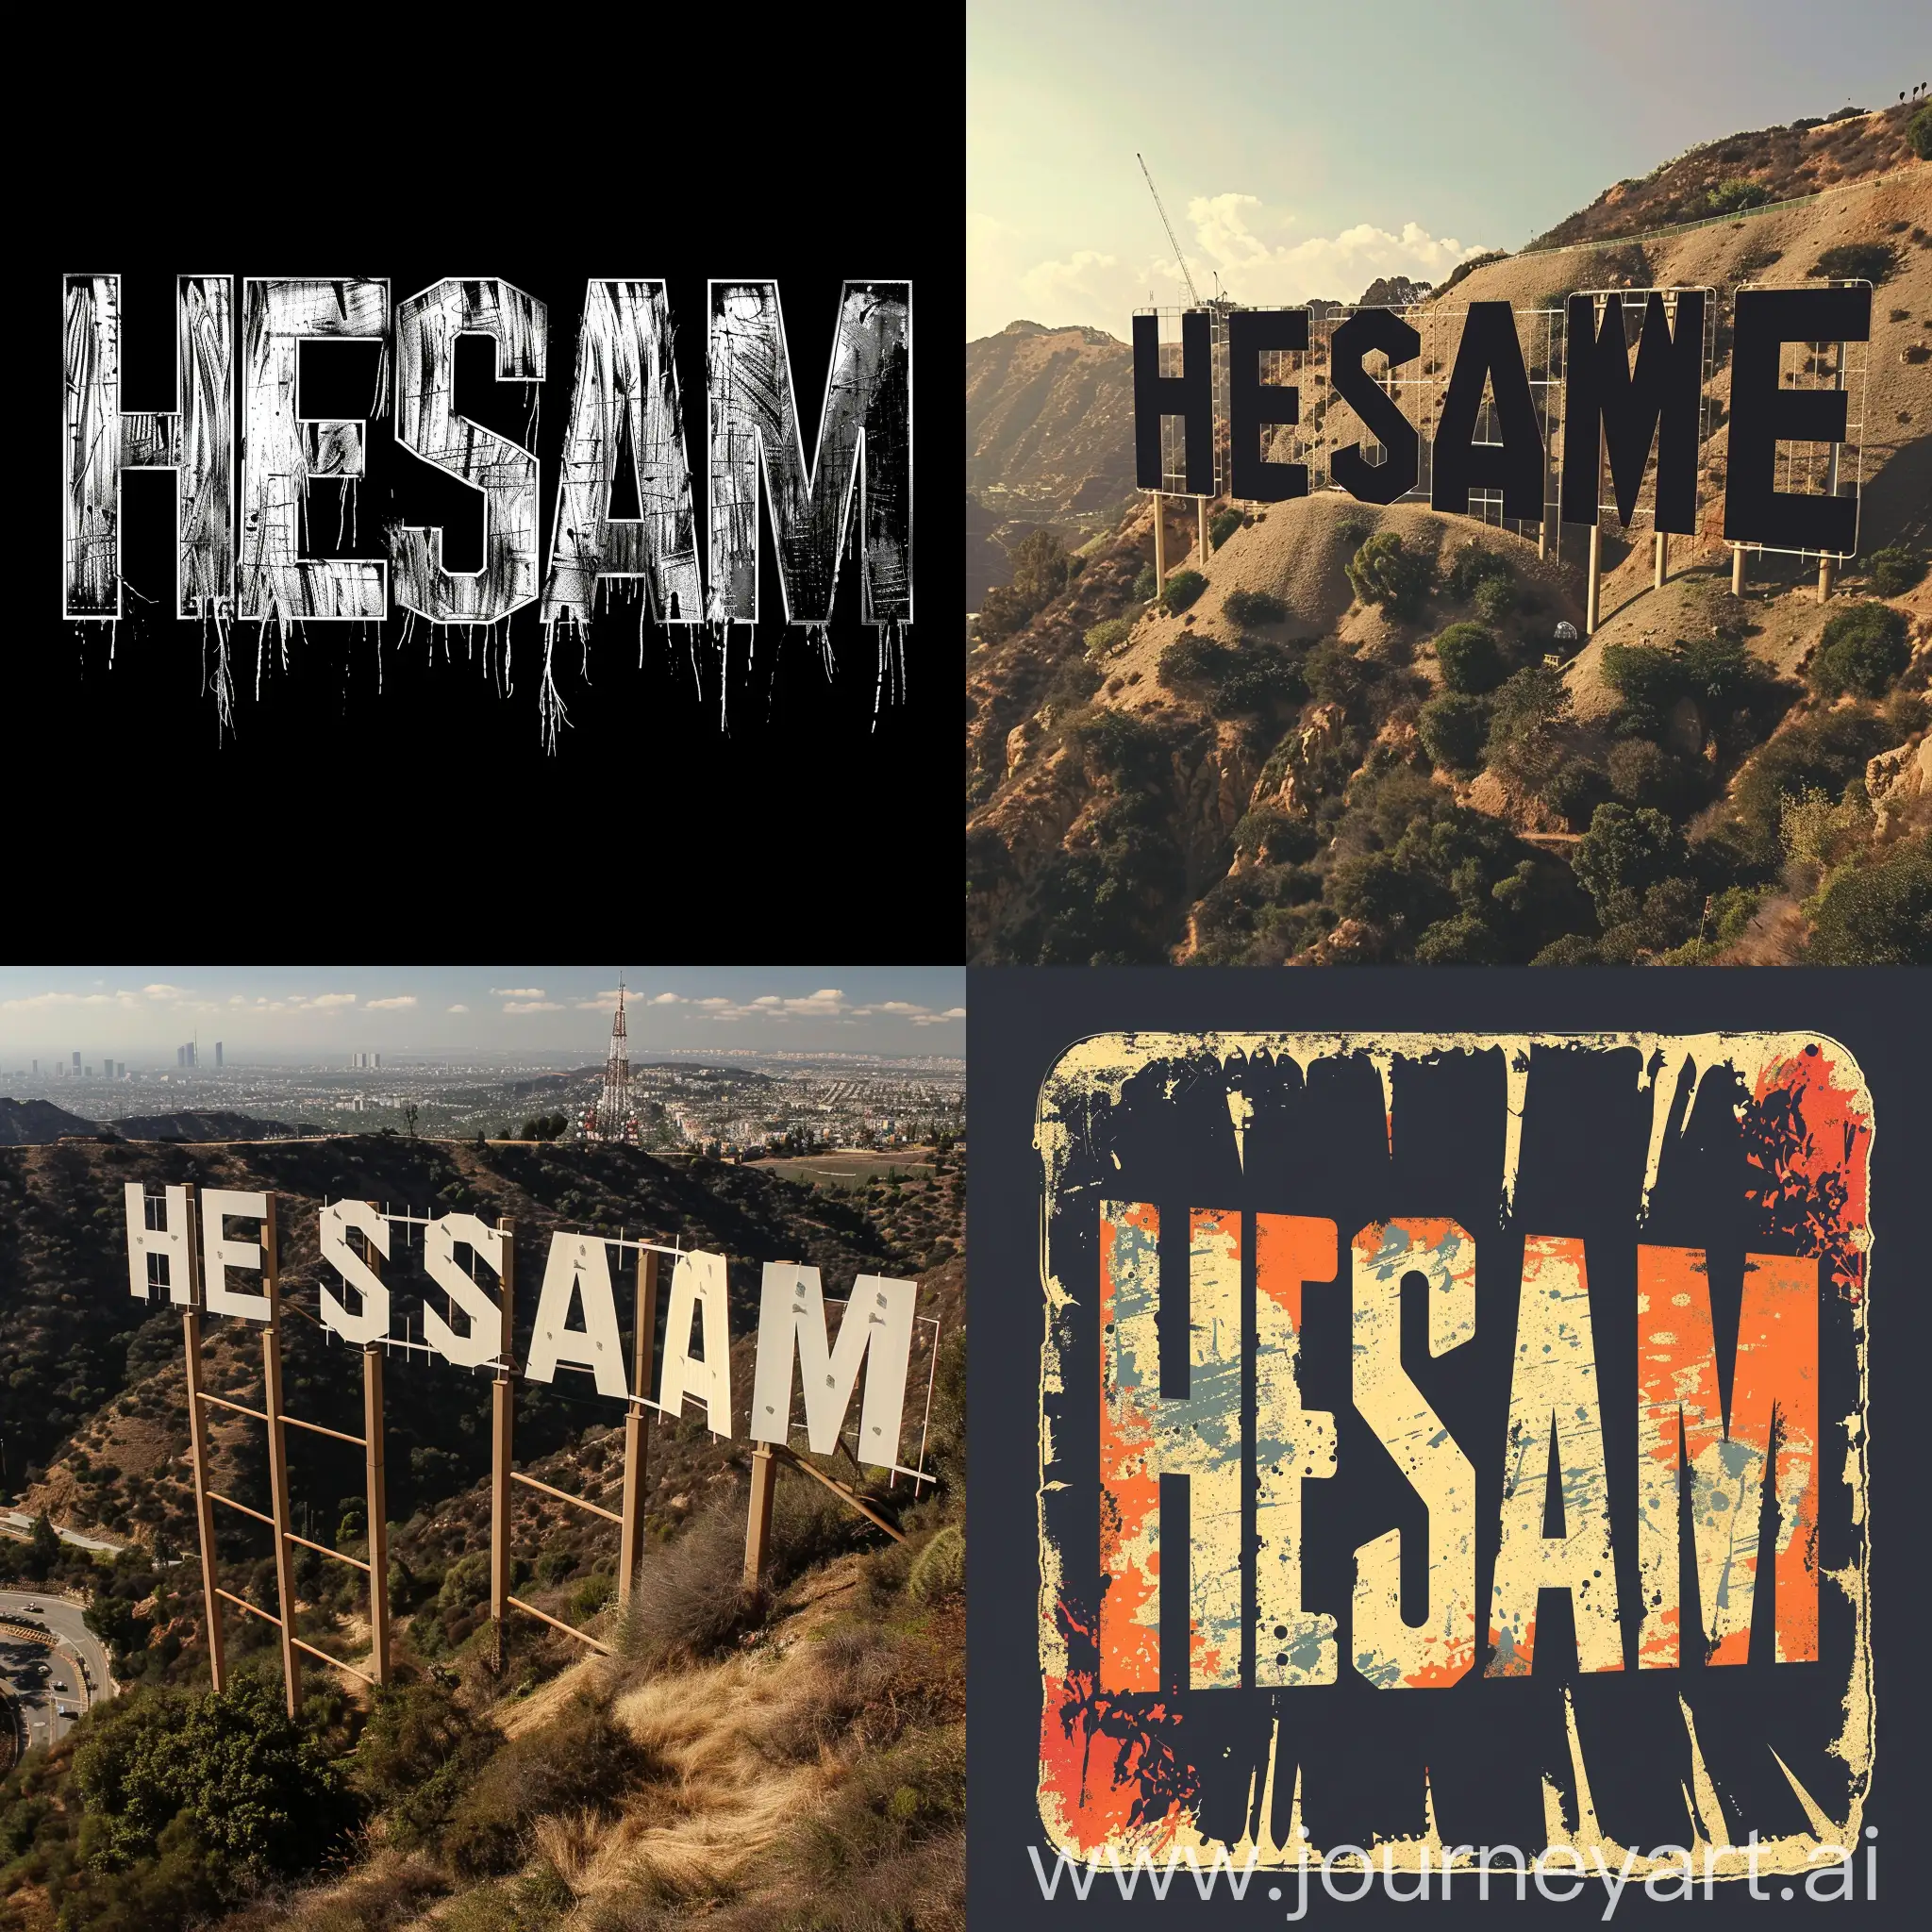 "HESAM" text in the style of the Hollywood sign